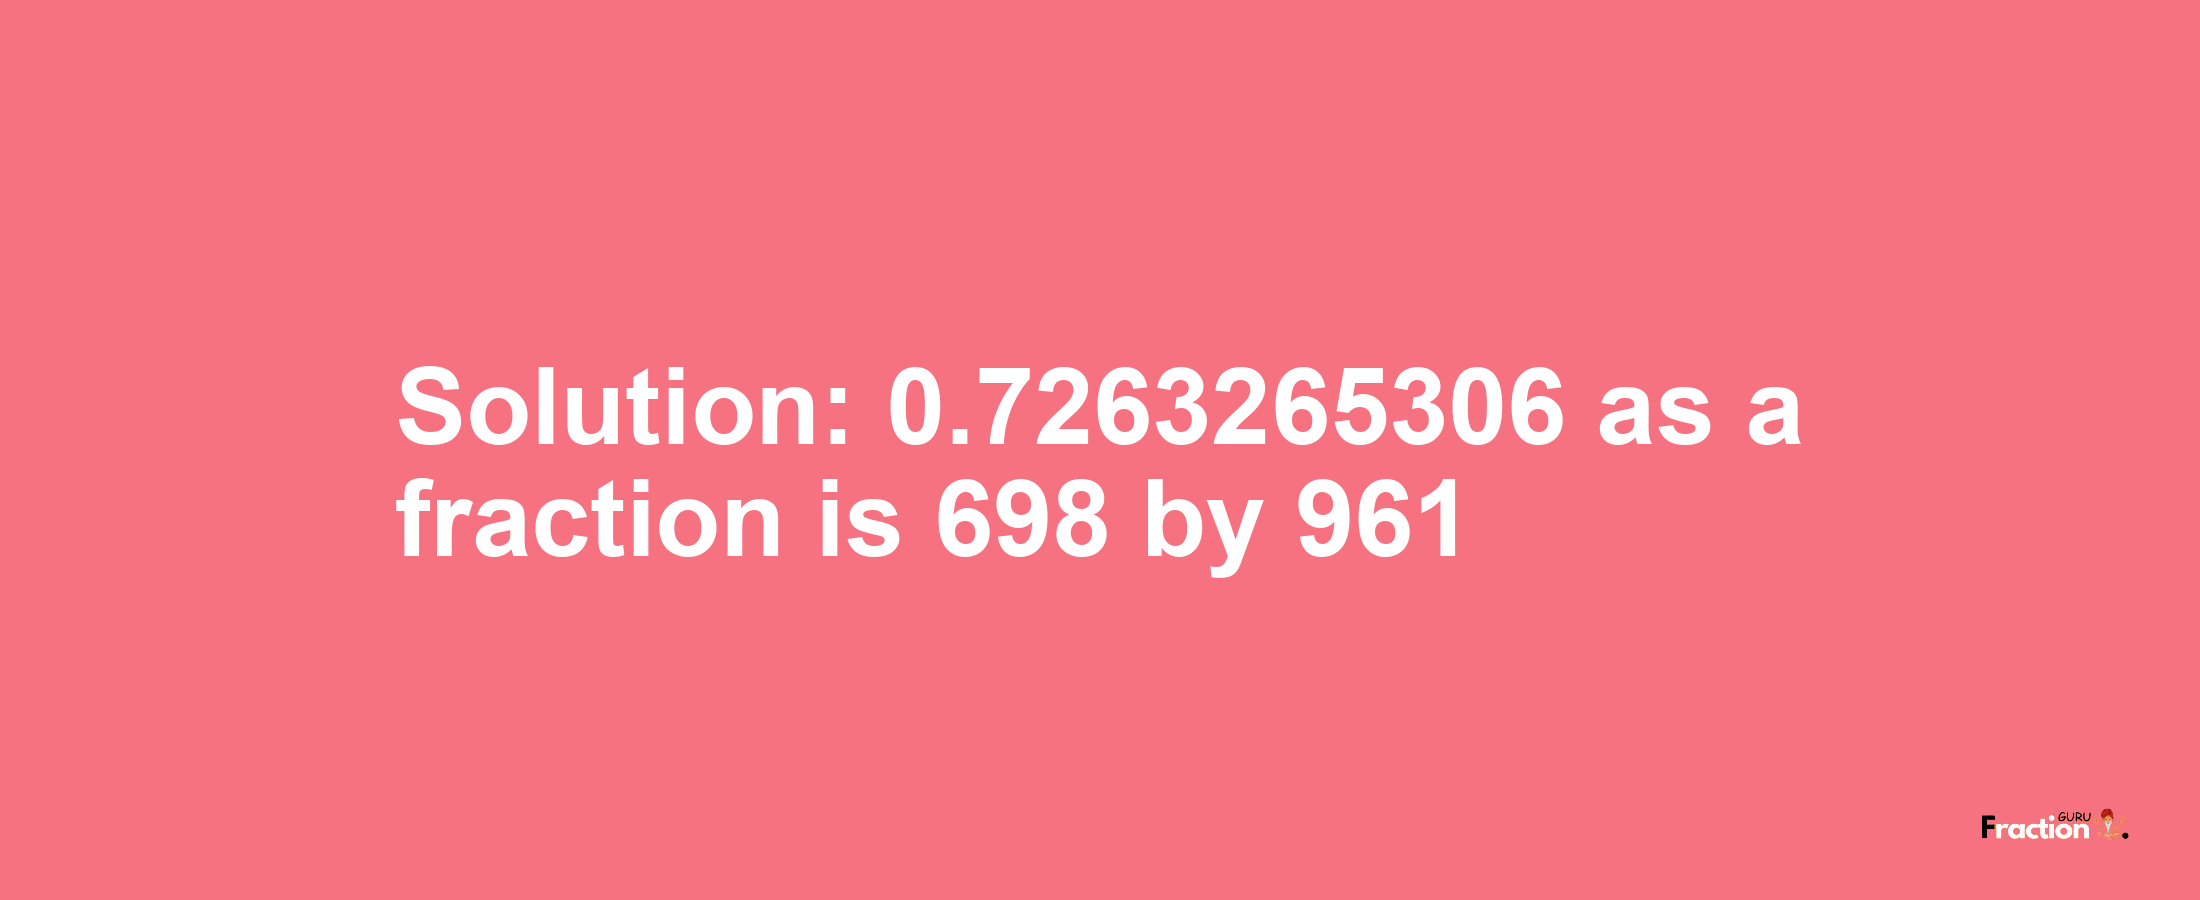 Solution:0.7263265306 as a fraction is 698/961